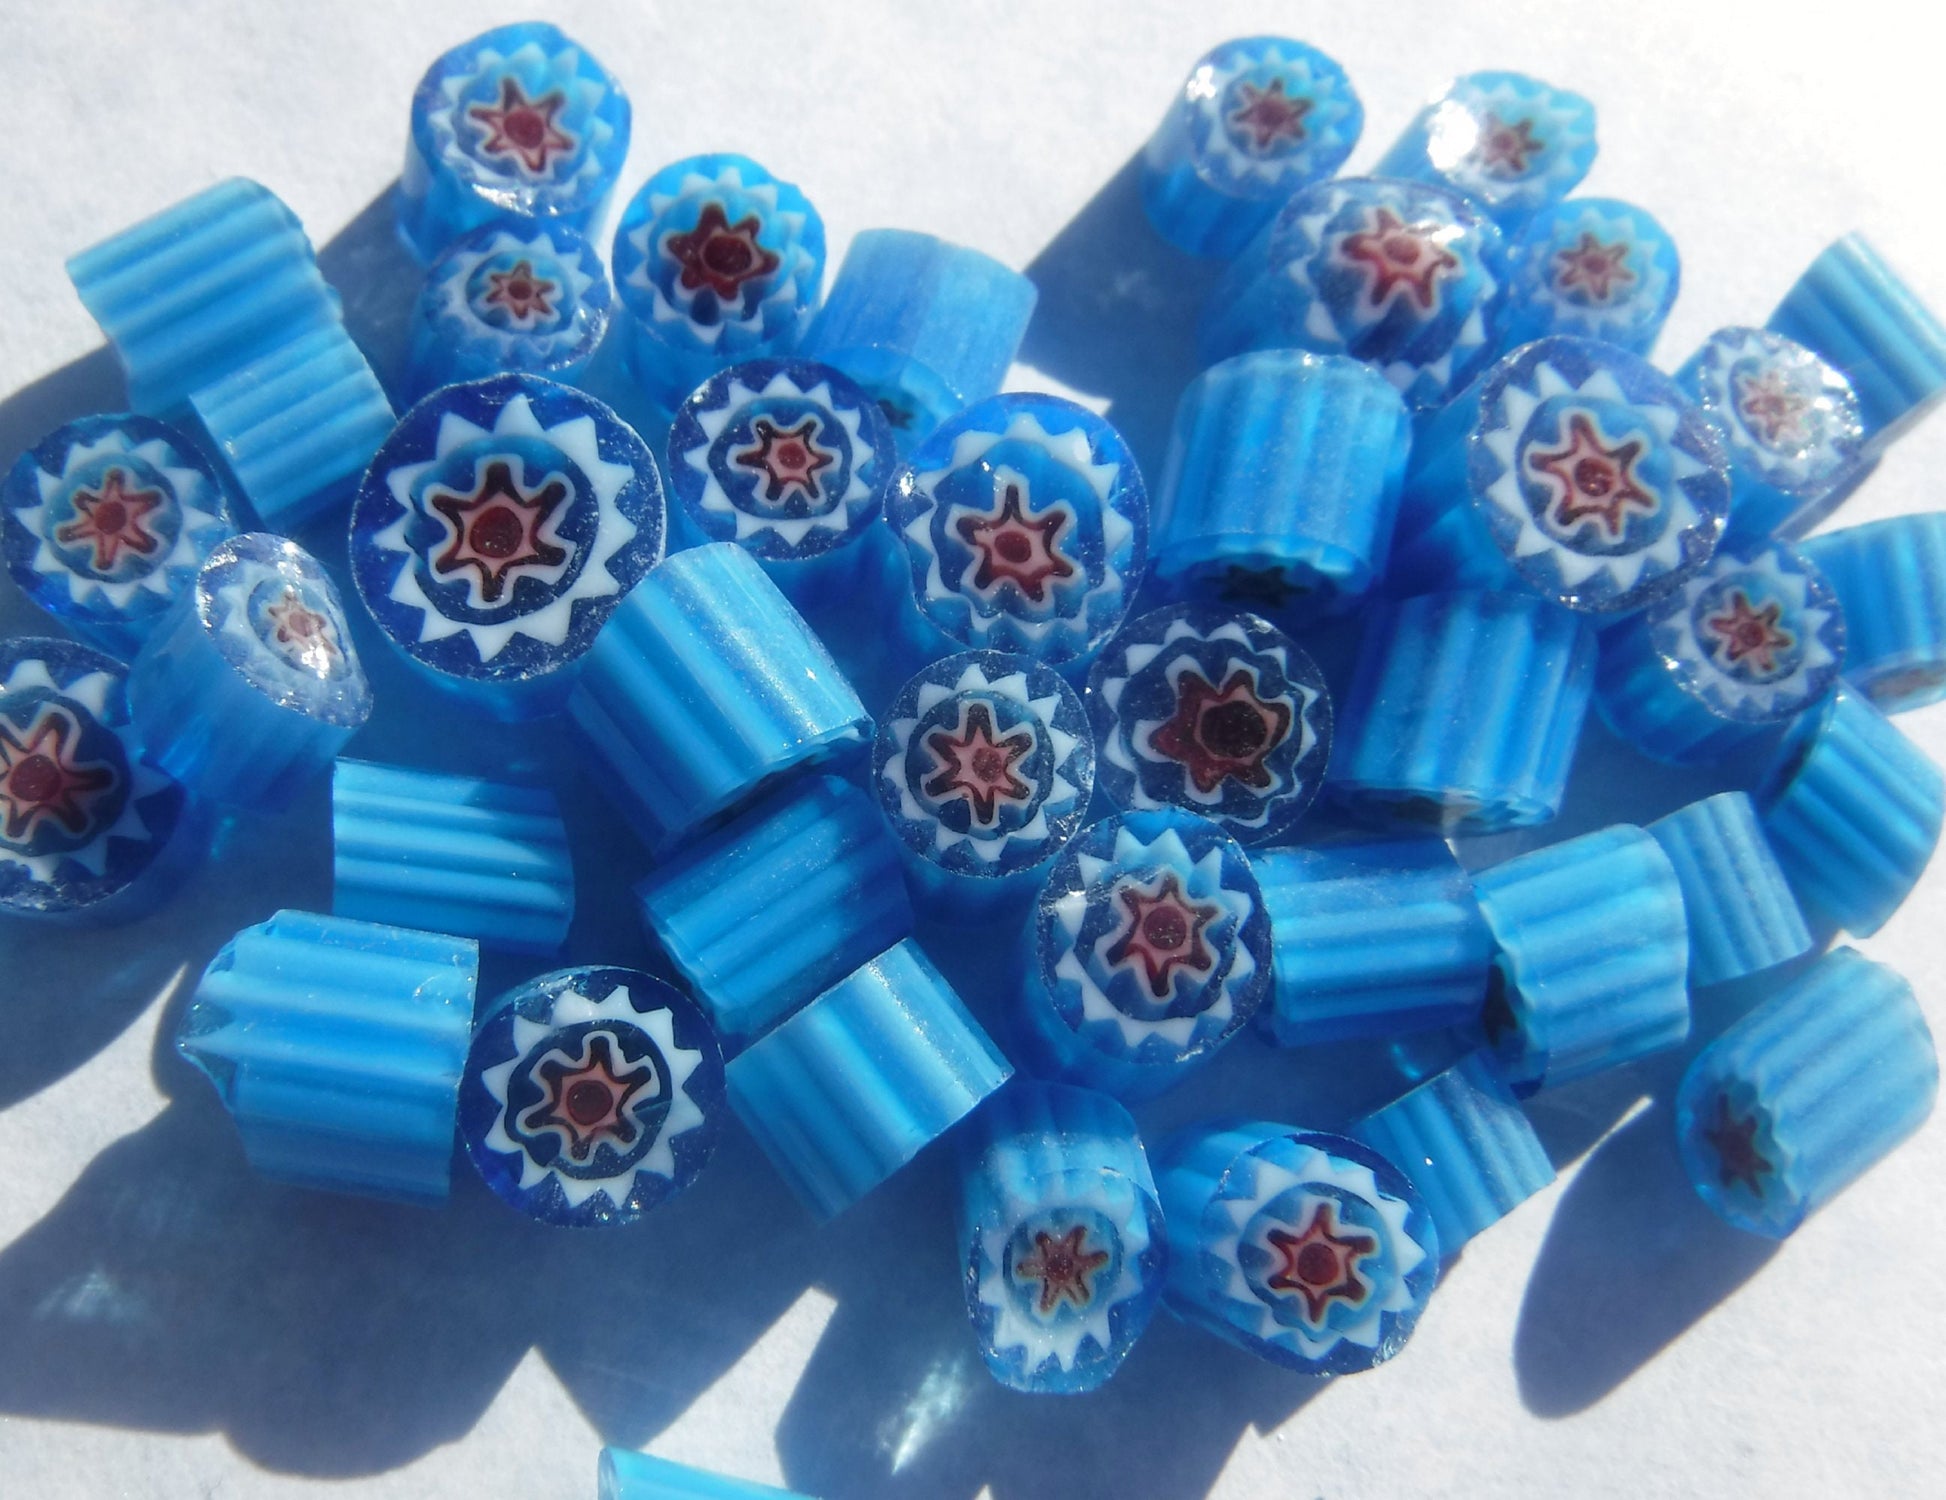 Blue with Red Millefiori - 25 grams - Unique Mosaic Glass Tiles